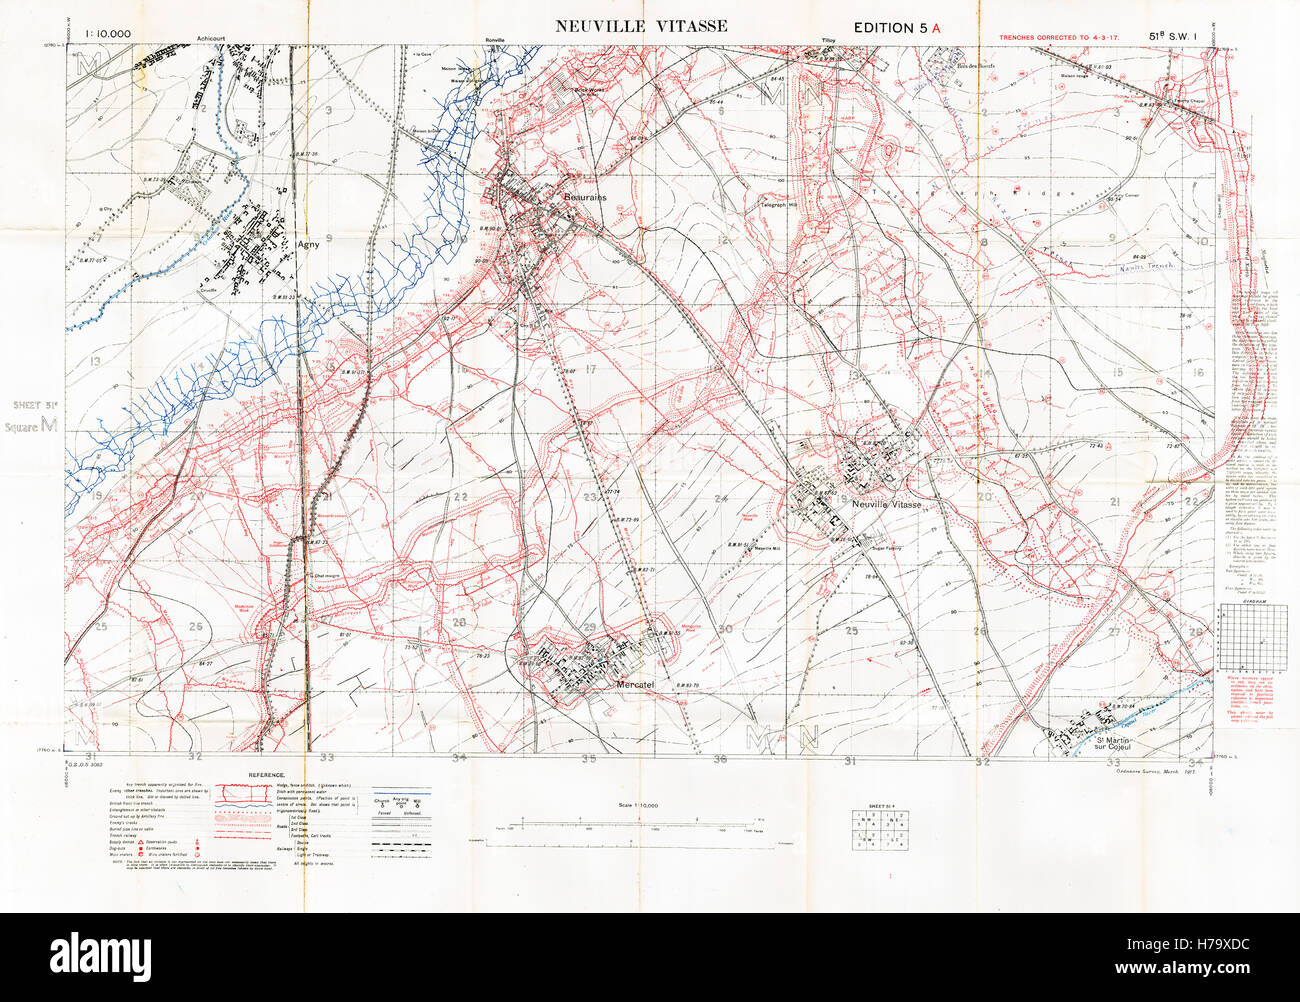 Neuville Vitasse Battlefield Map, 1917 Edition 5A 1:10,000 military map of the British sector South East of Arras in Northern France, with square 51B SW1, trenches correct at March 1917 Stock Photo